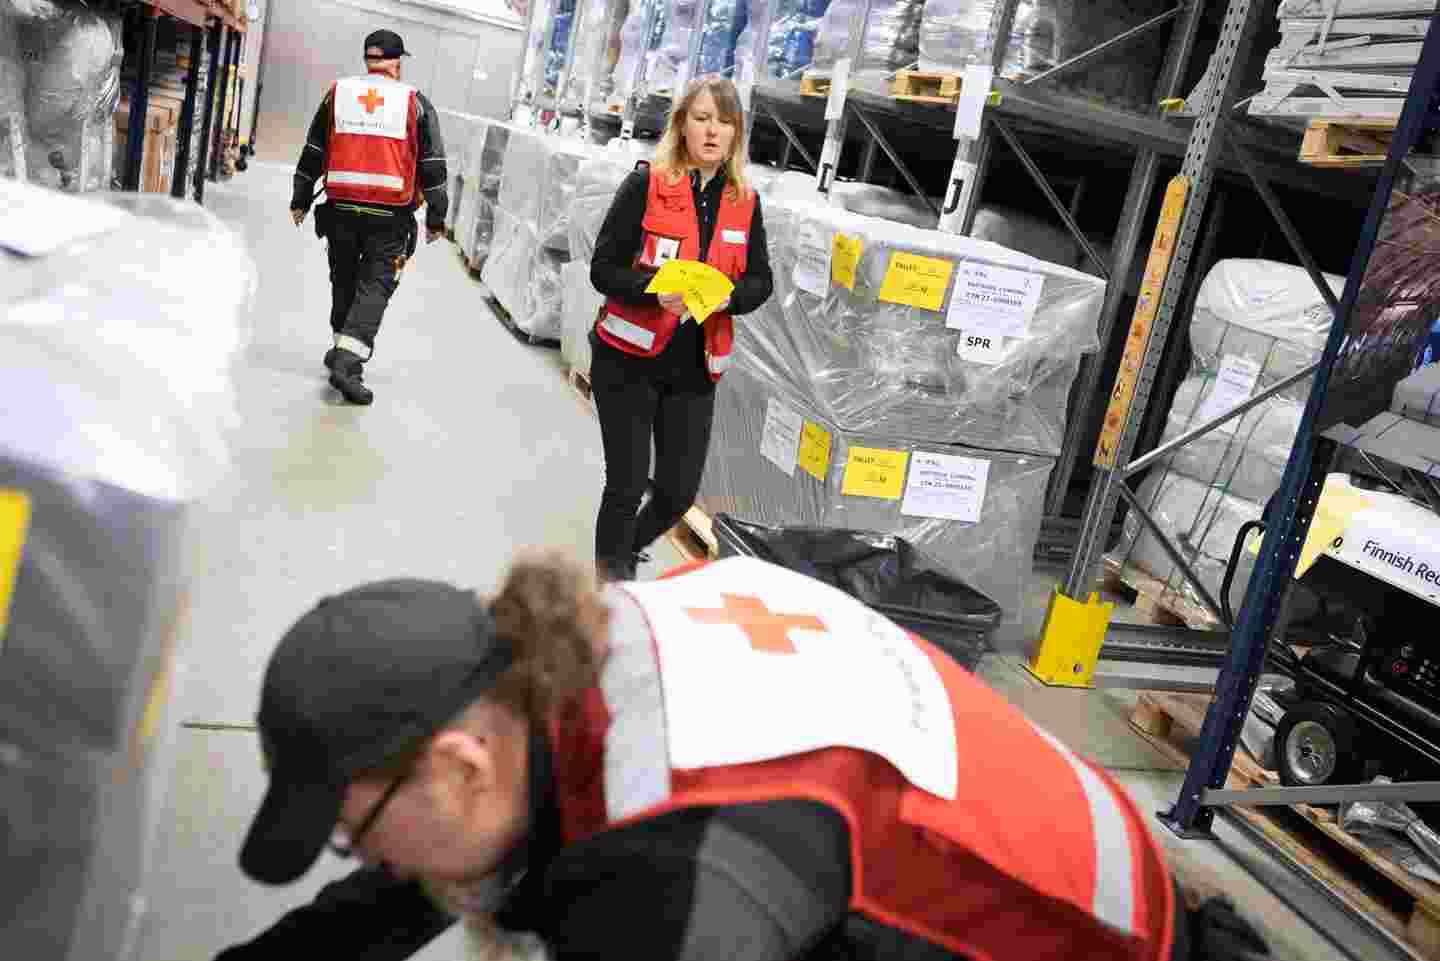 Three people working in a storage facility between shelves filled with aid supplies.